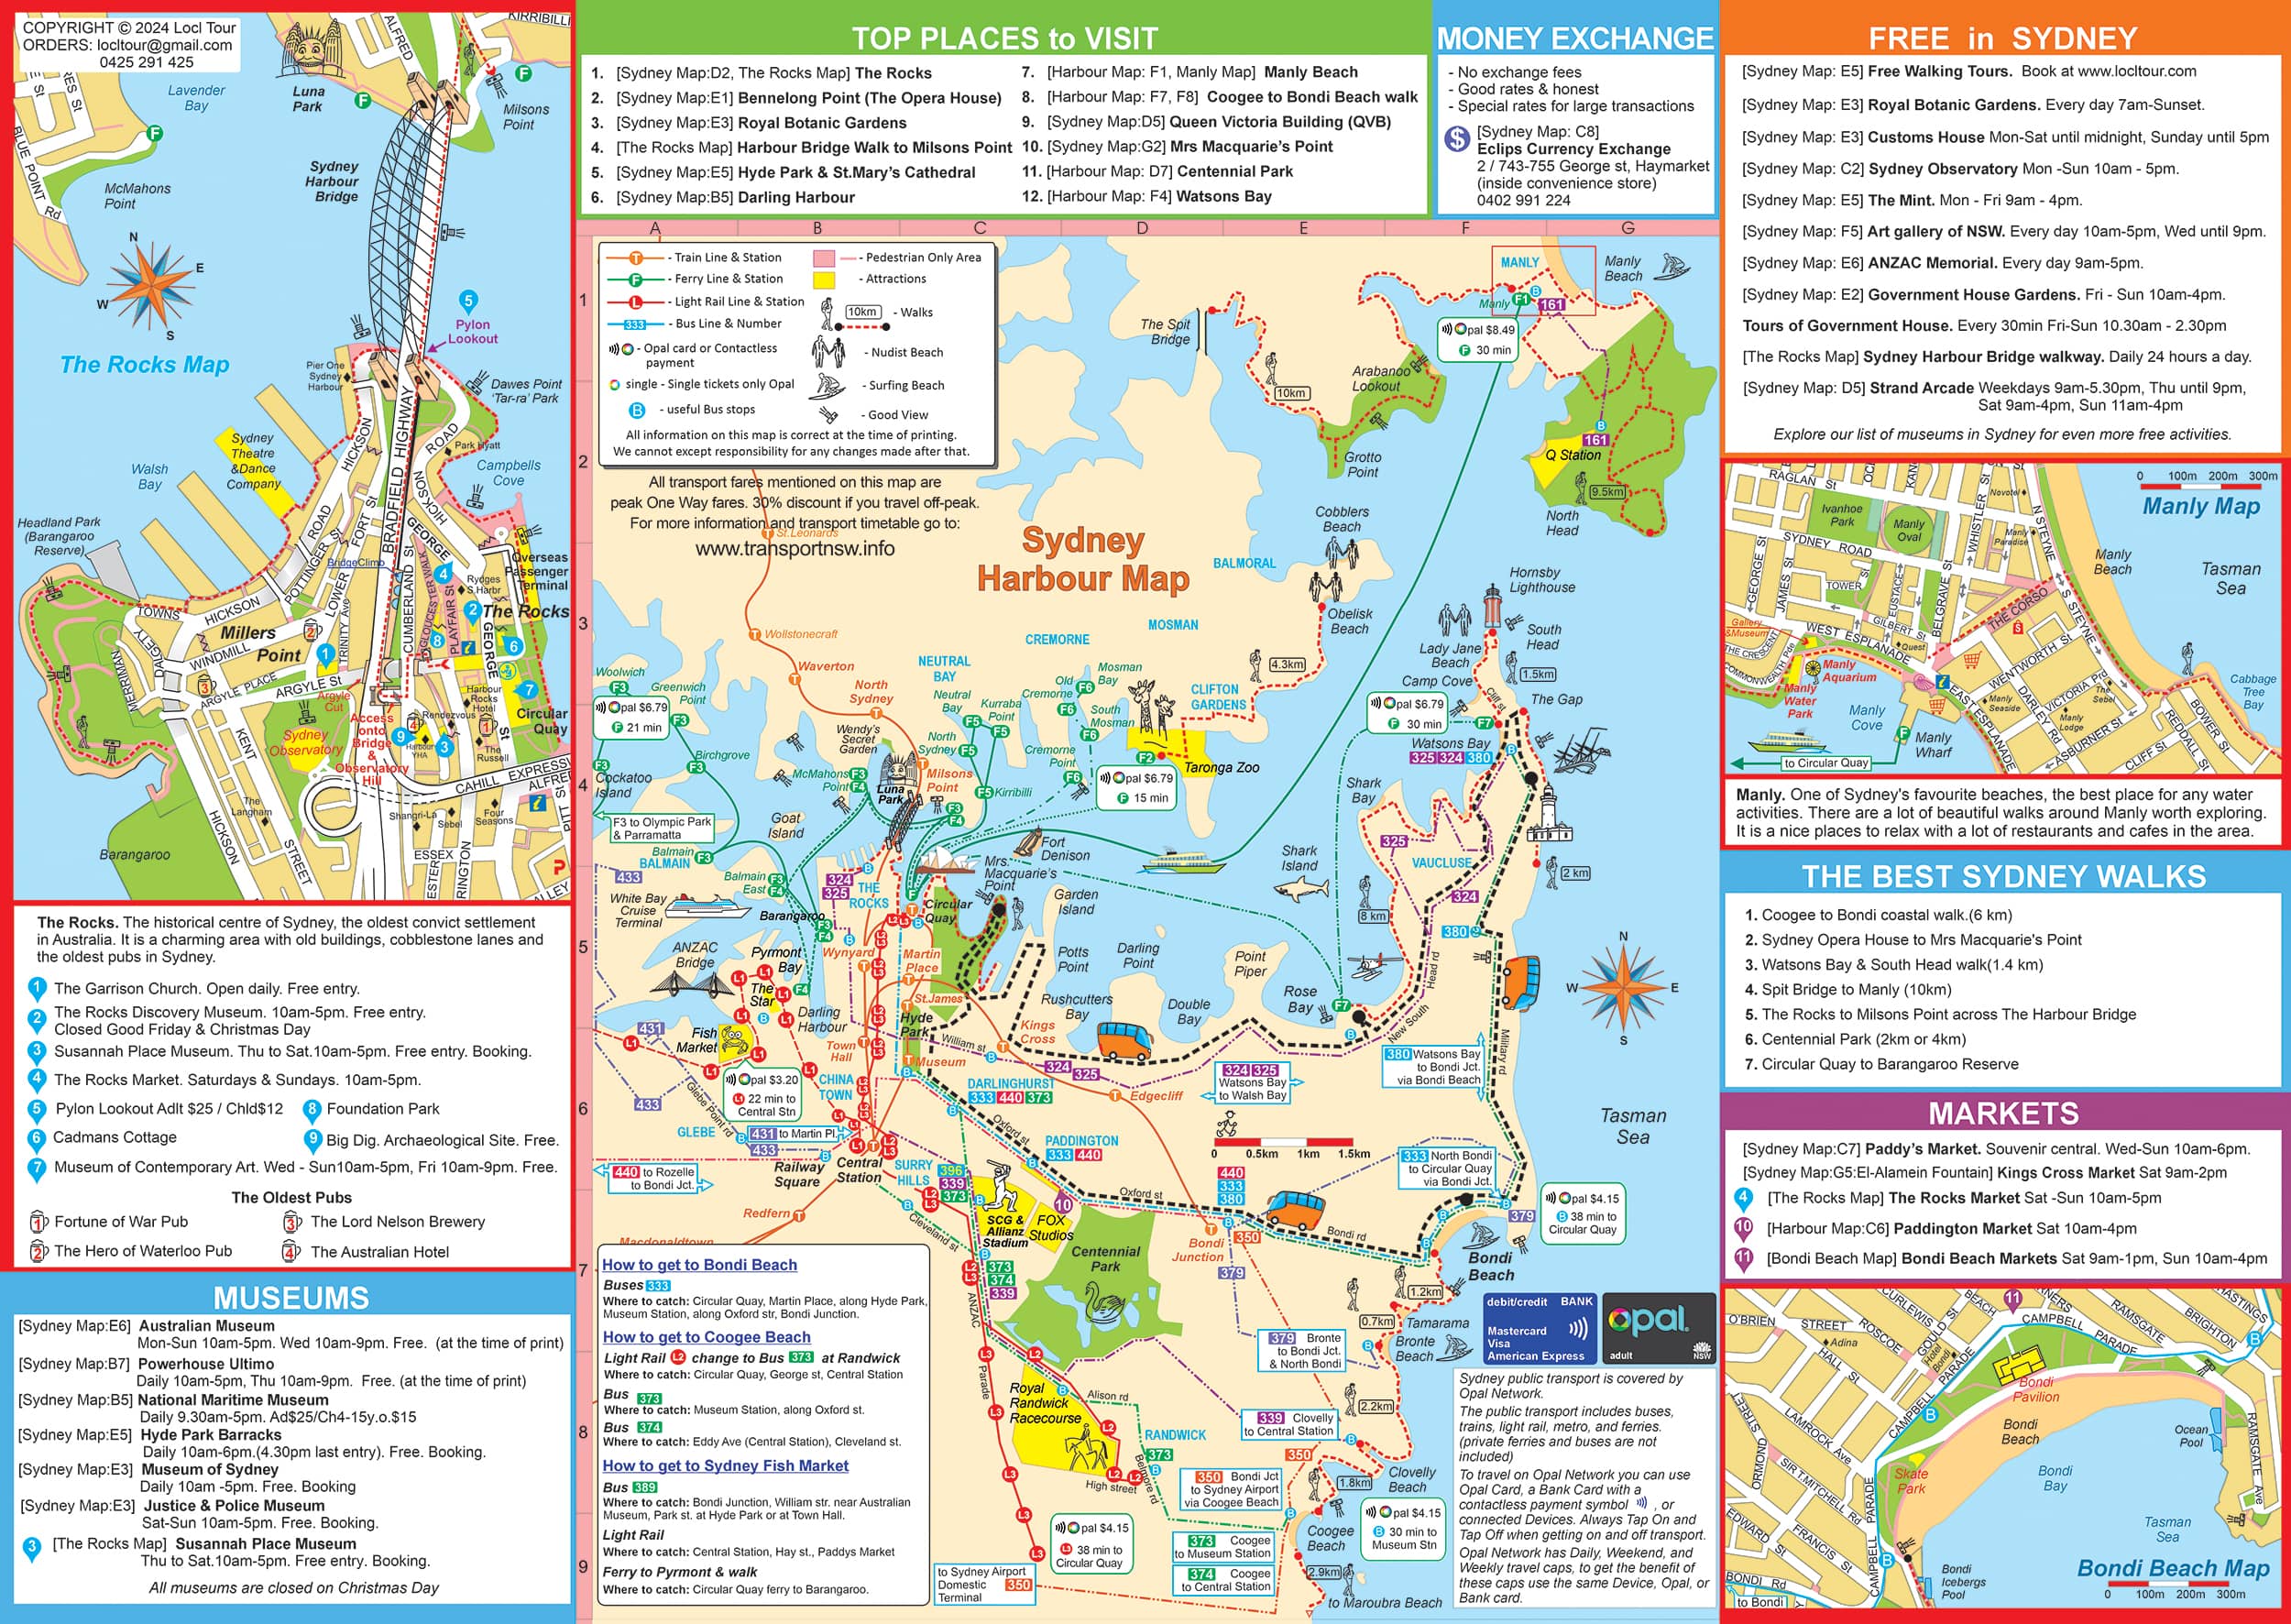 A tourist map of Sydney Harbour. The map covers the area from North Sydney until Bondi Beach and from Balmain until the Tasman Sea. It provides information on Sydney transport, attractions, walks, and lists different activities.